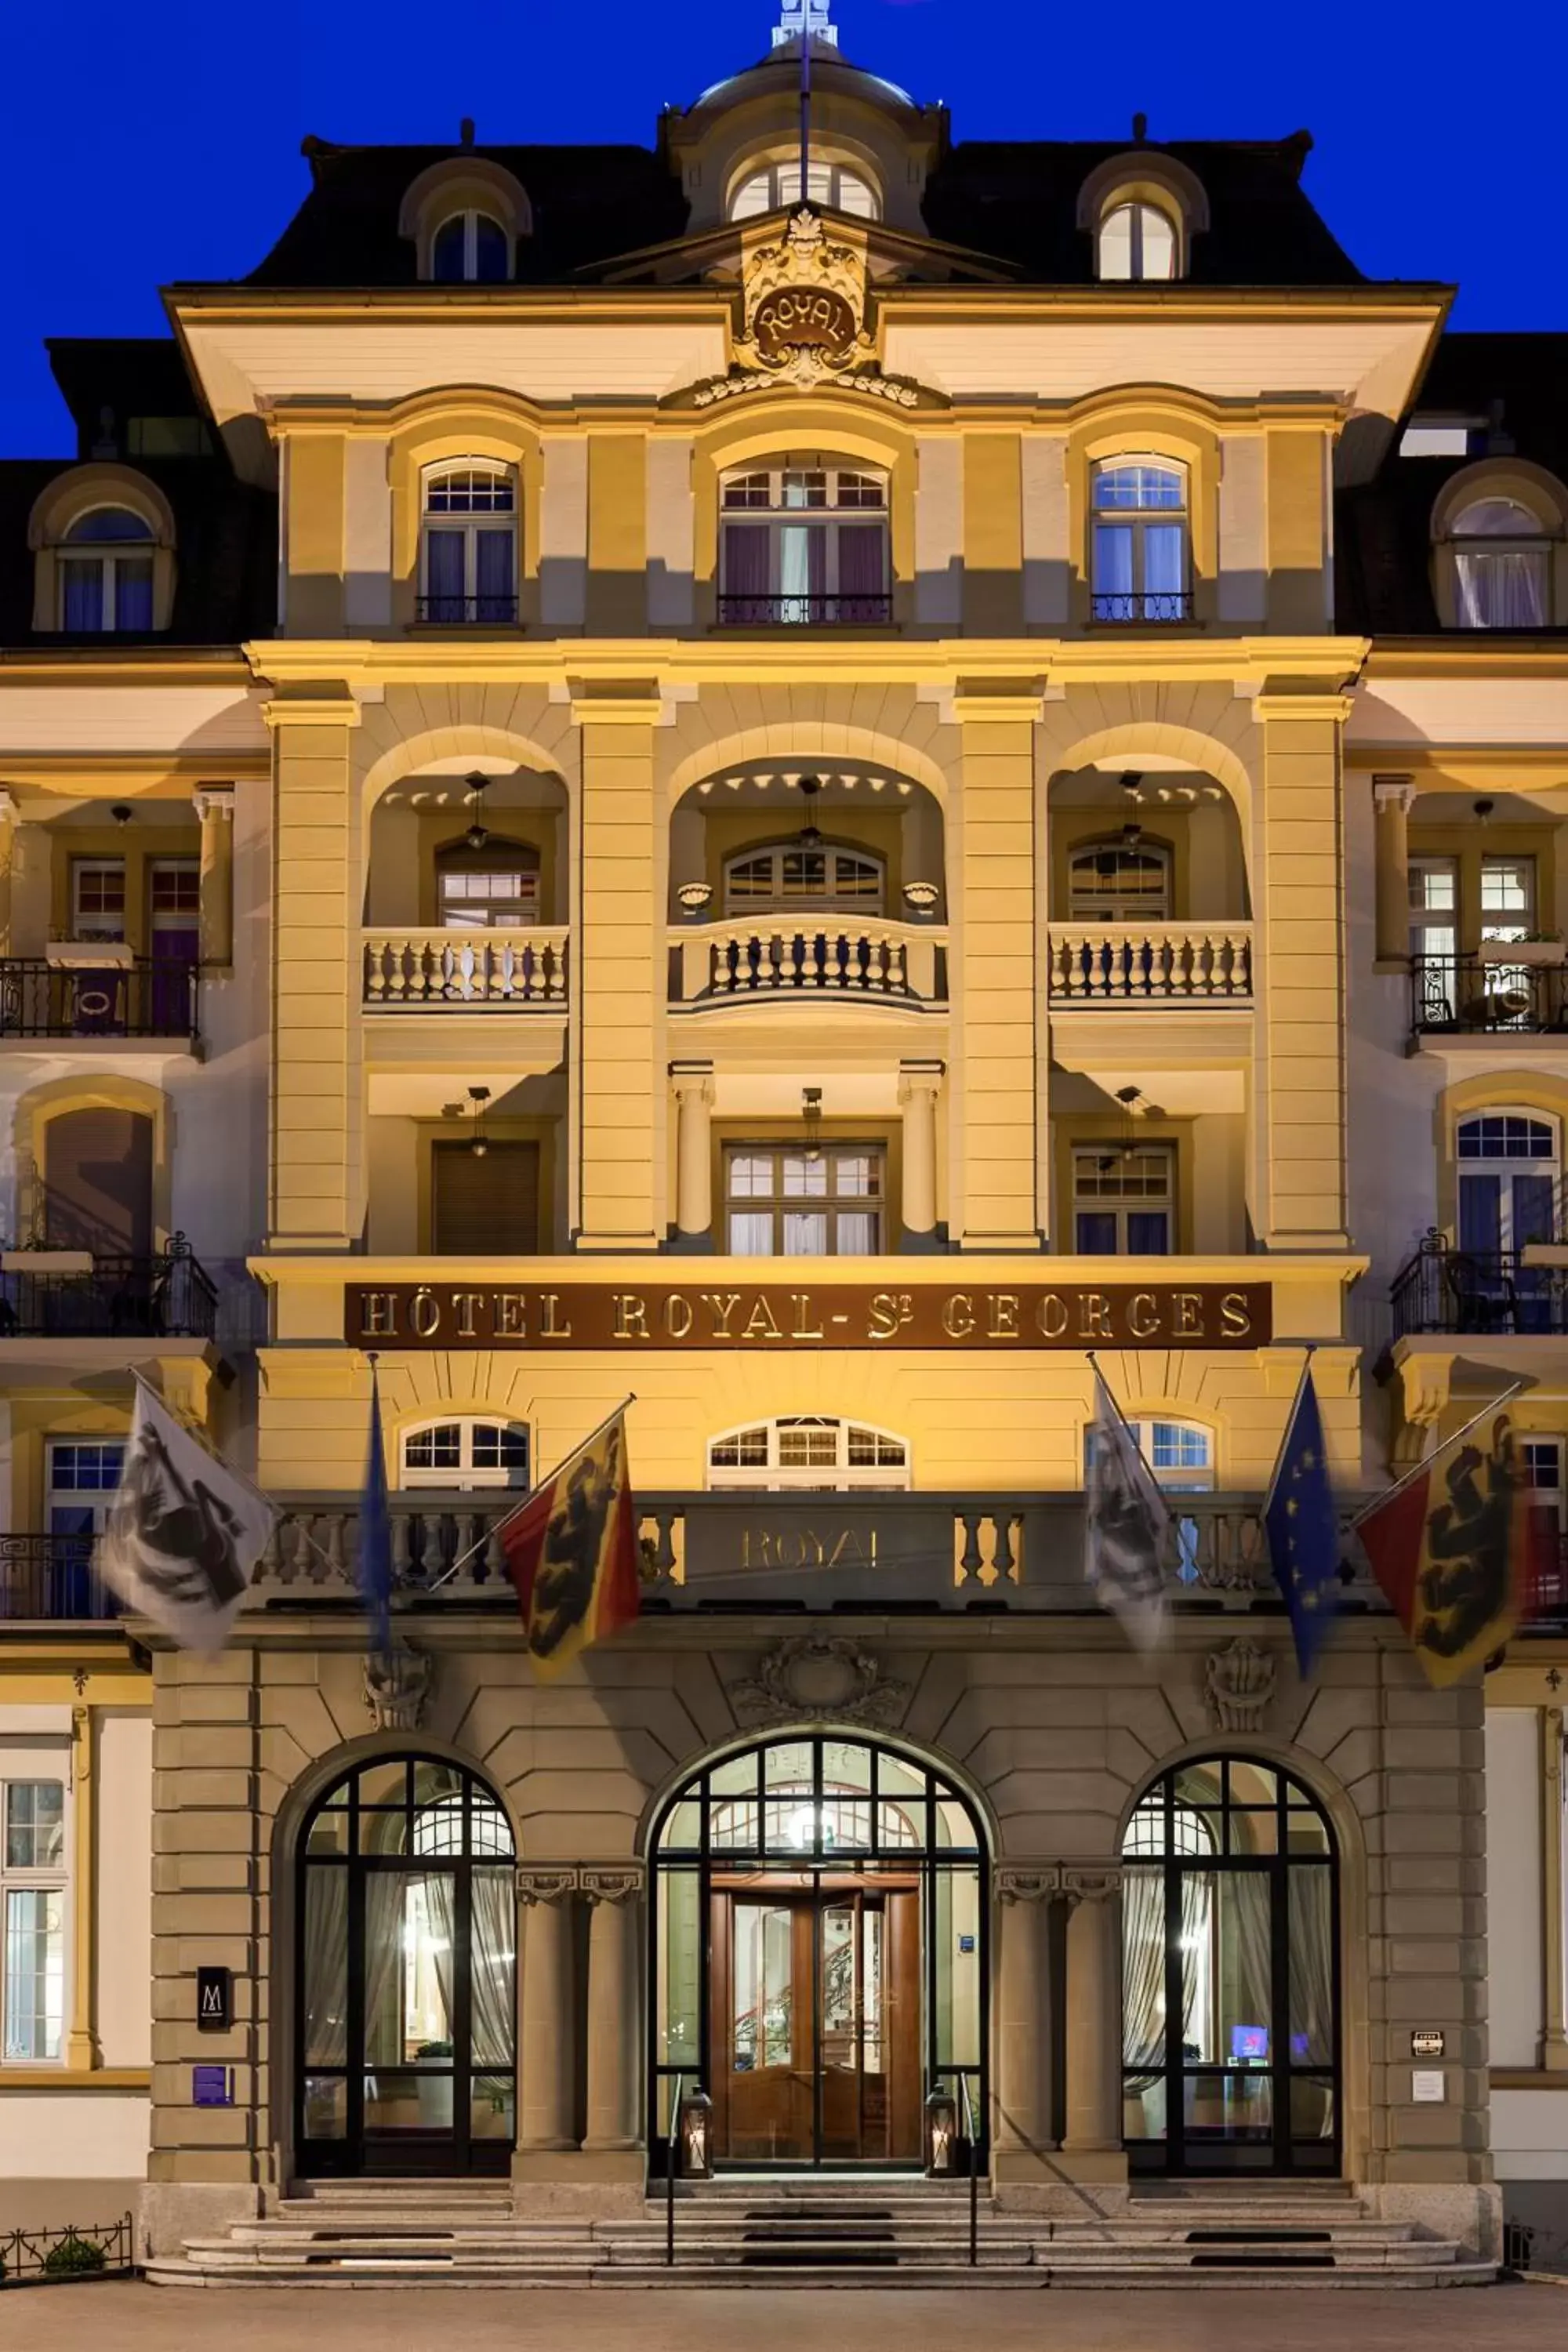 Facade/entrance, Property Building in Hotel Royal St Georges Interlaken MGallery Collection